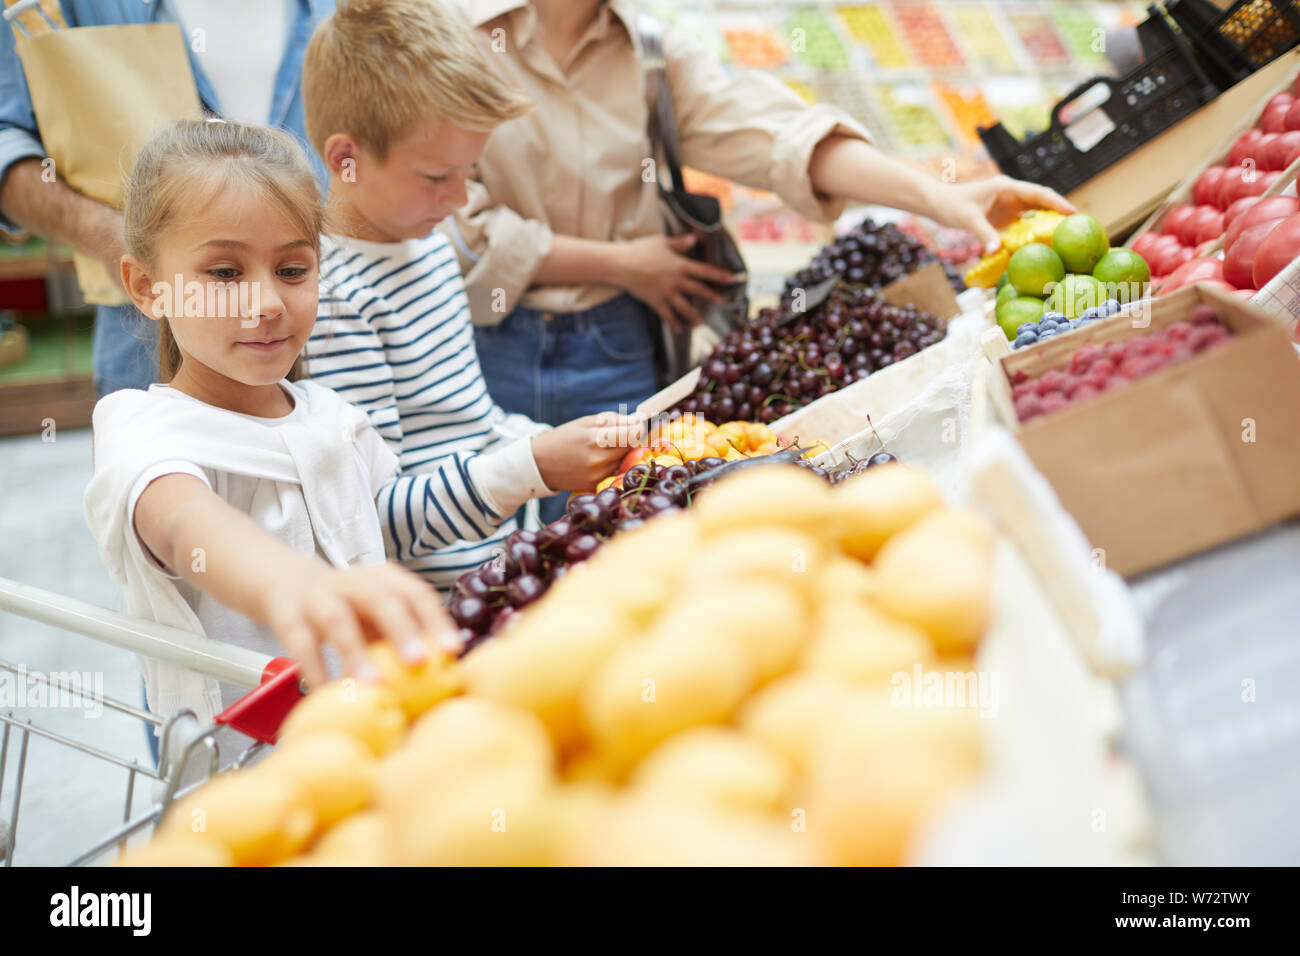 Portrait of two cute kids choosing fruits at farmers market while grocery shopping with parents, copy space Stock Photo